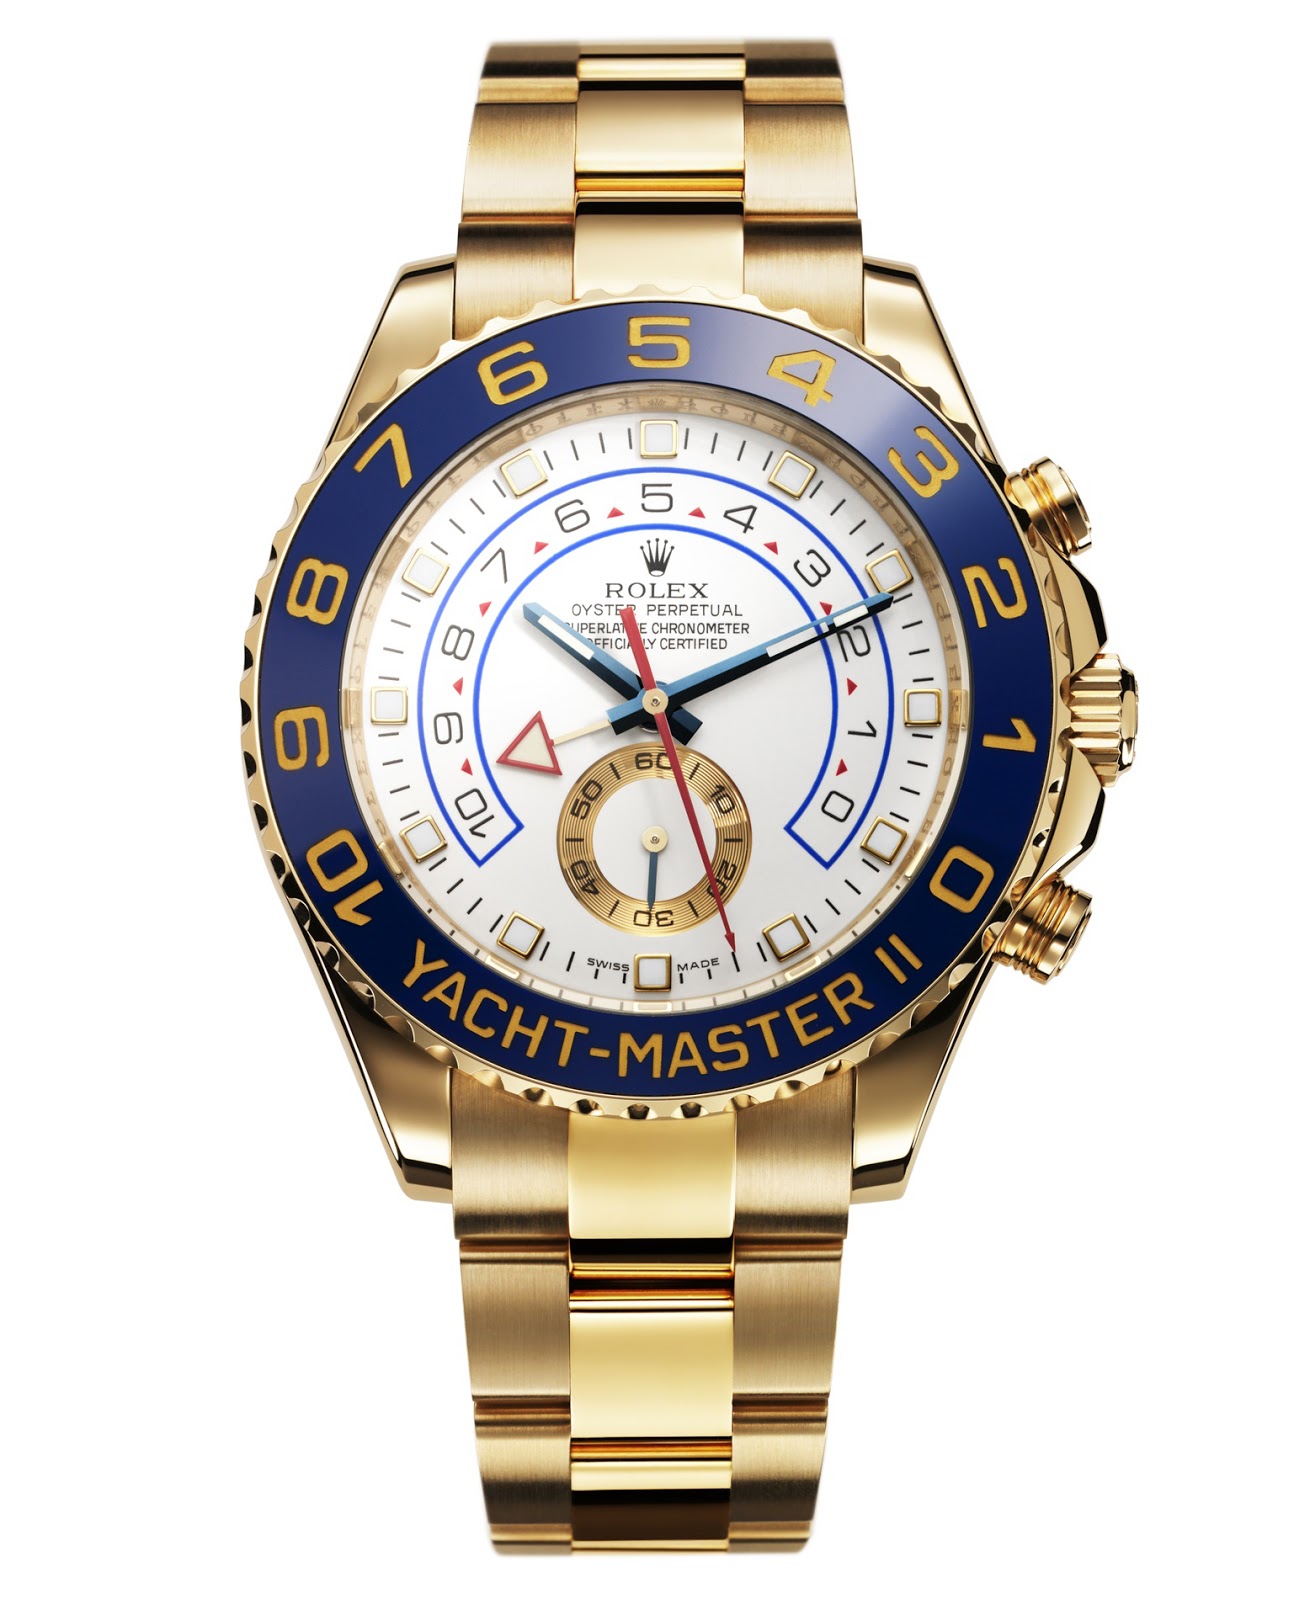 Rolex Introduces Yacht-Master II Model in 2007 - Rob's Rolex Chronicle